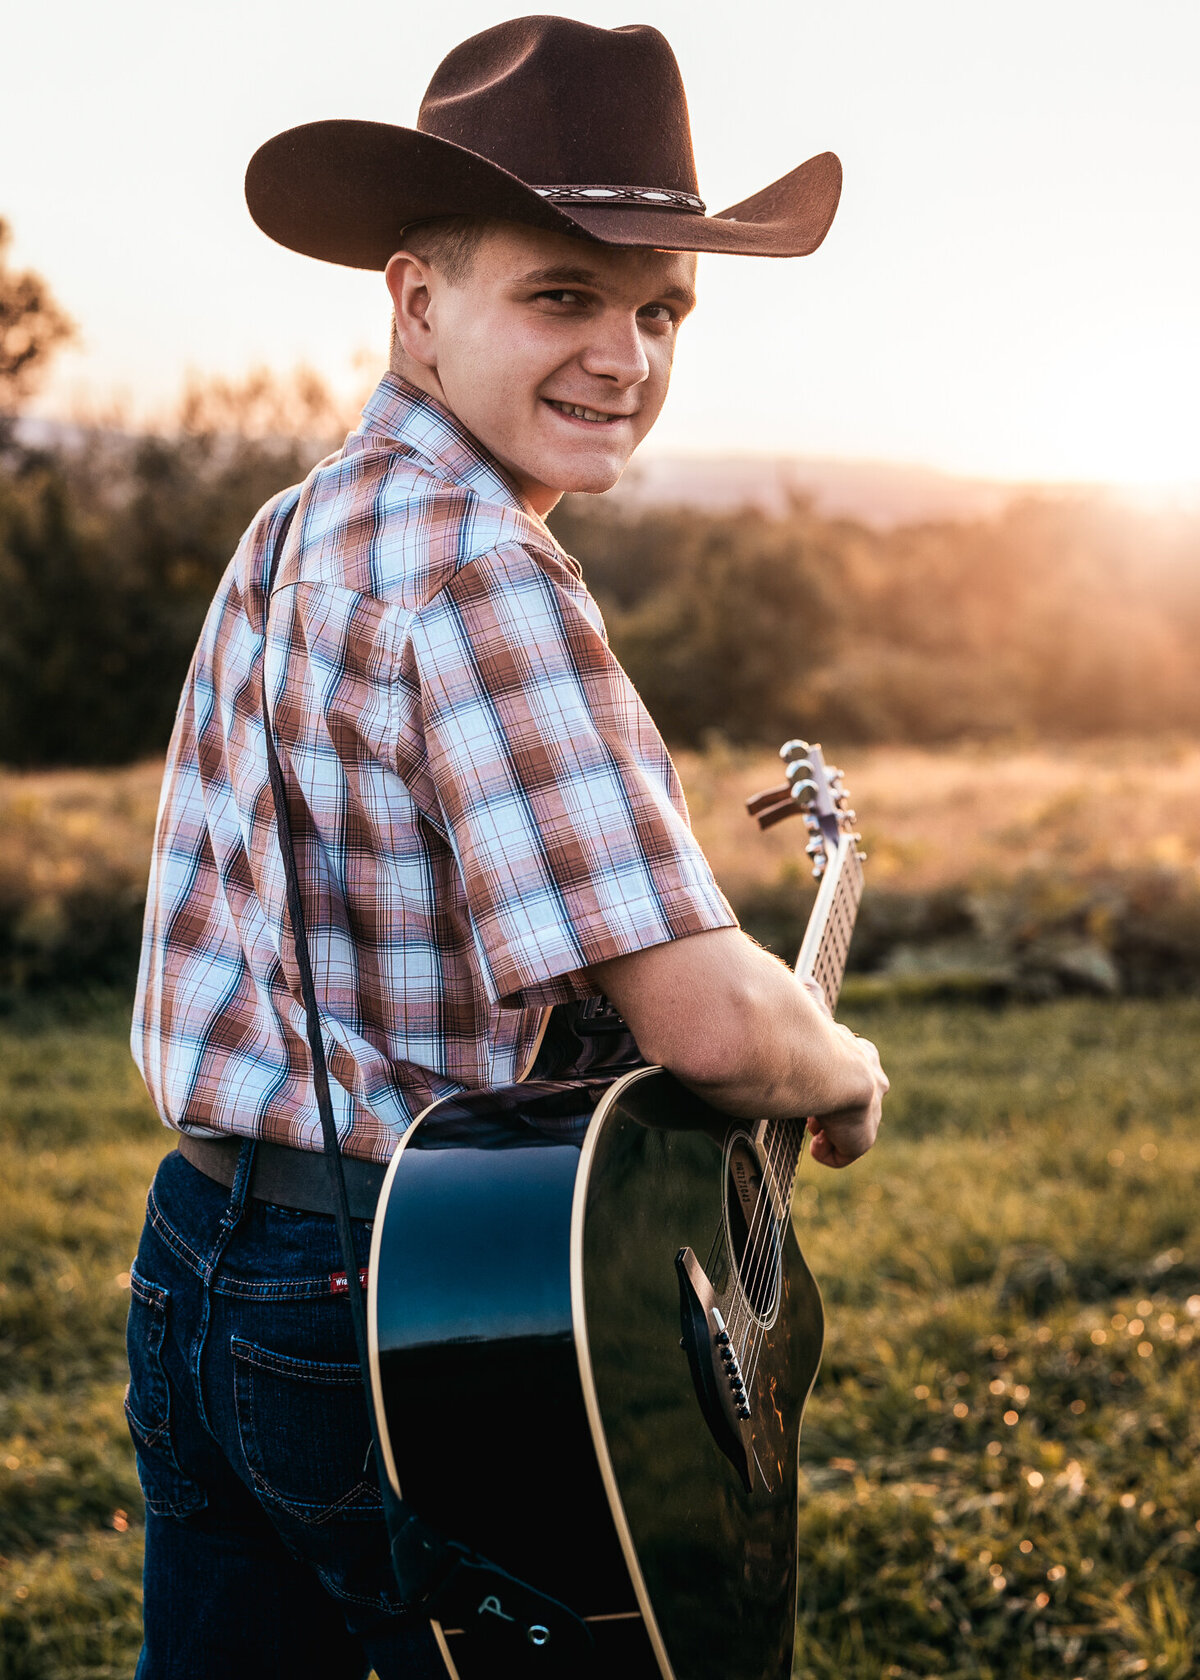 High School Senior play guitar at his photo session in open field at sunset by Lisa Smith Photography